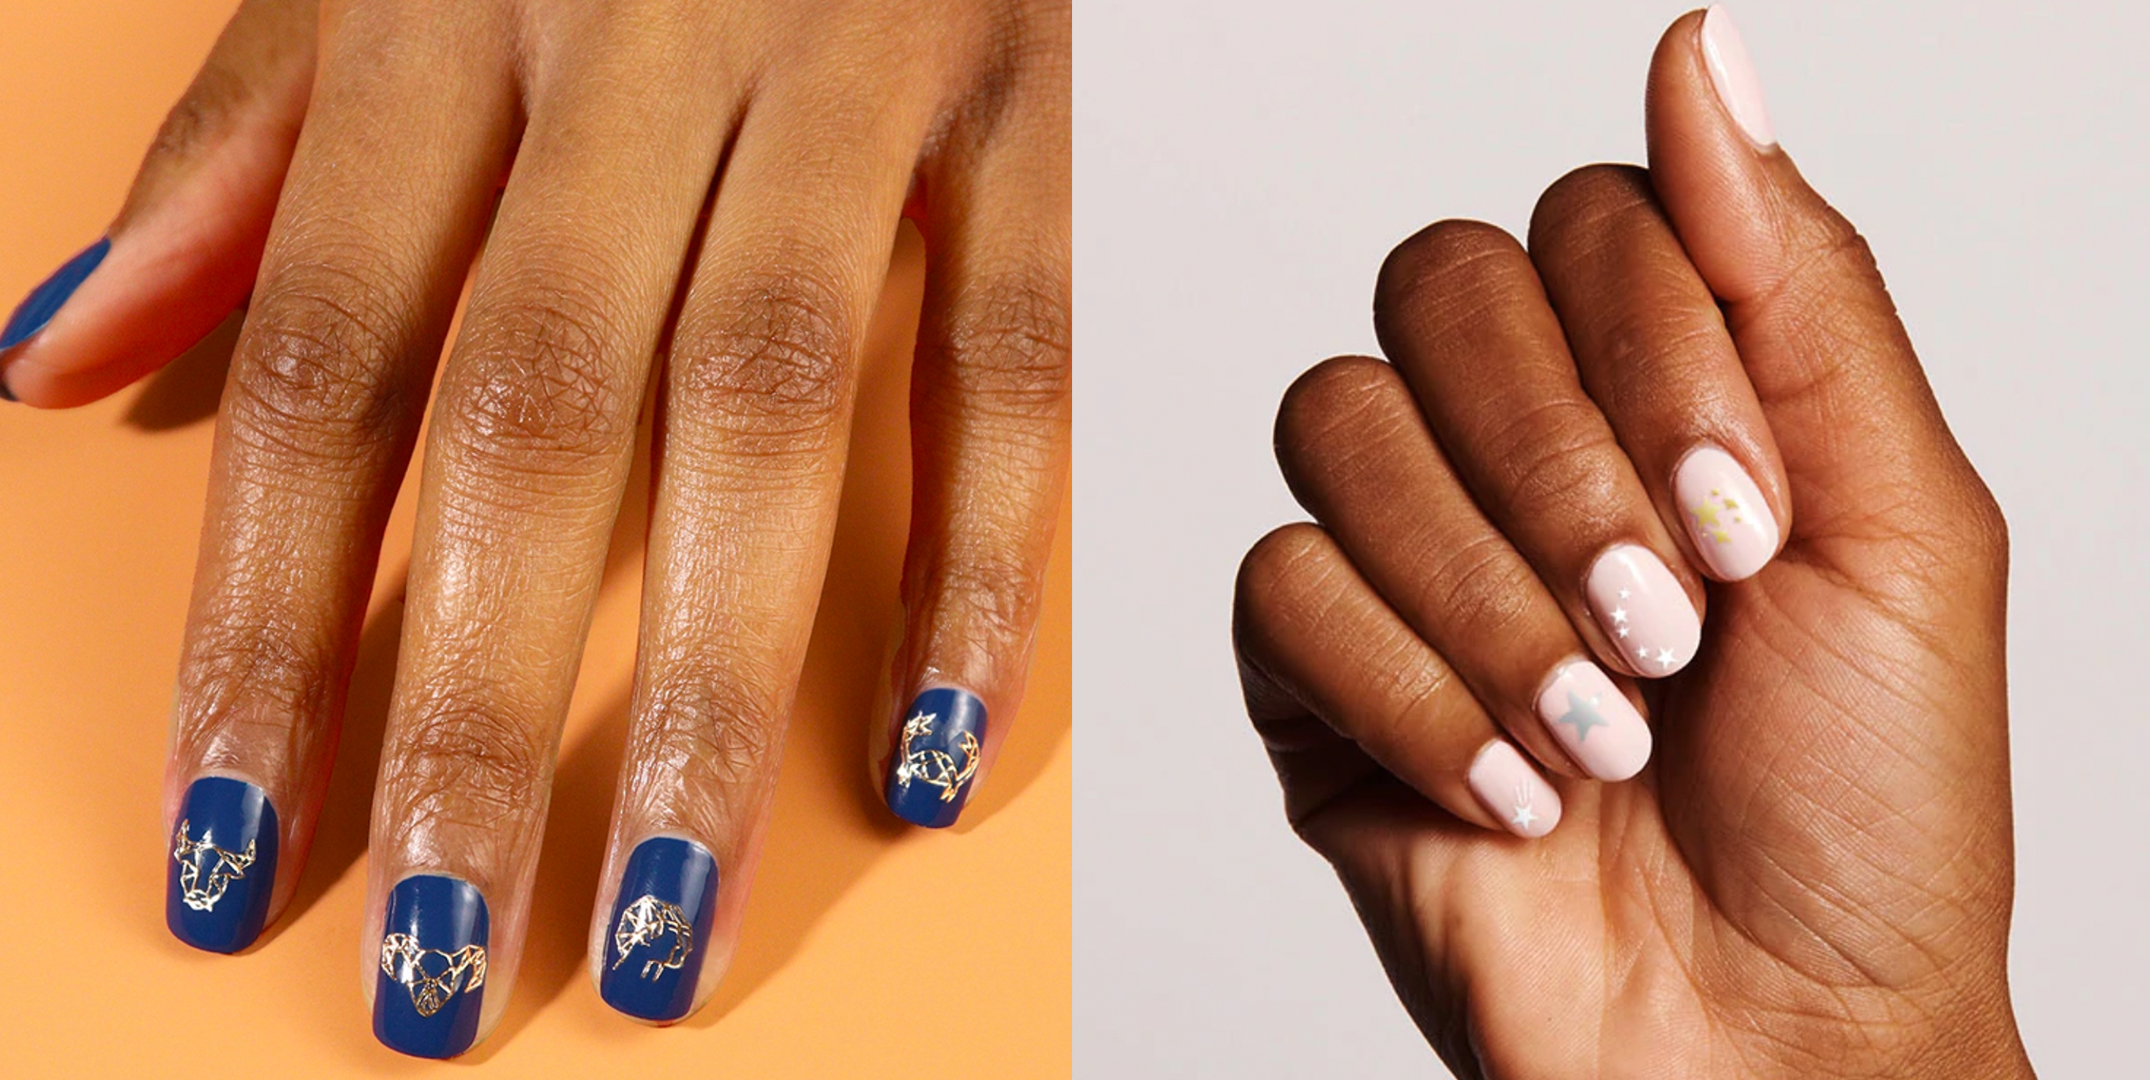 Step up your home mani game with Gelous' vegan & cruelty-free Gel Nail... |  TikTok